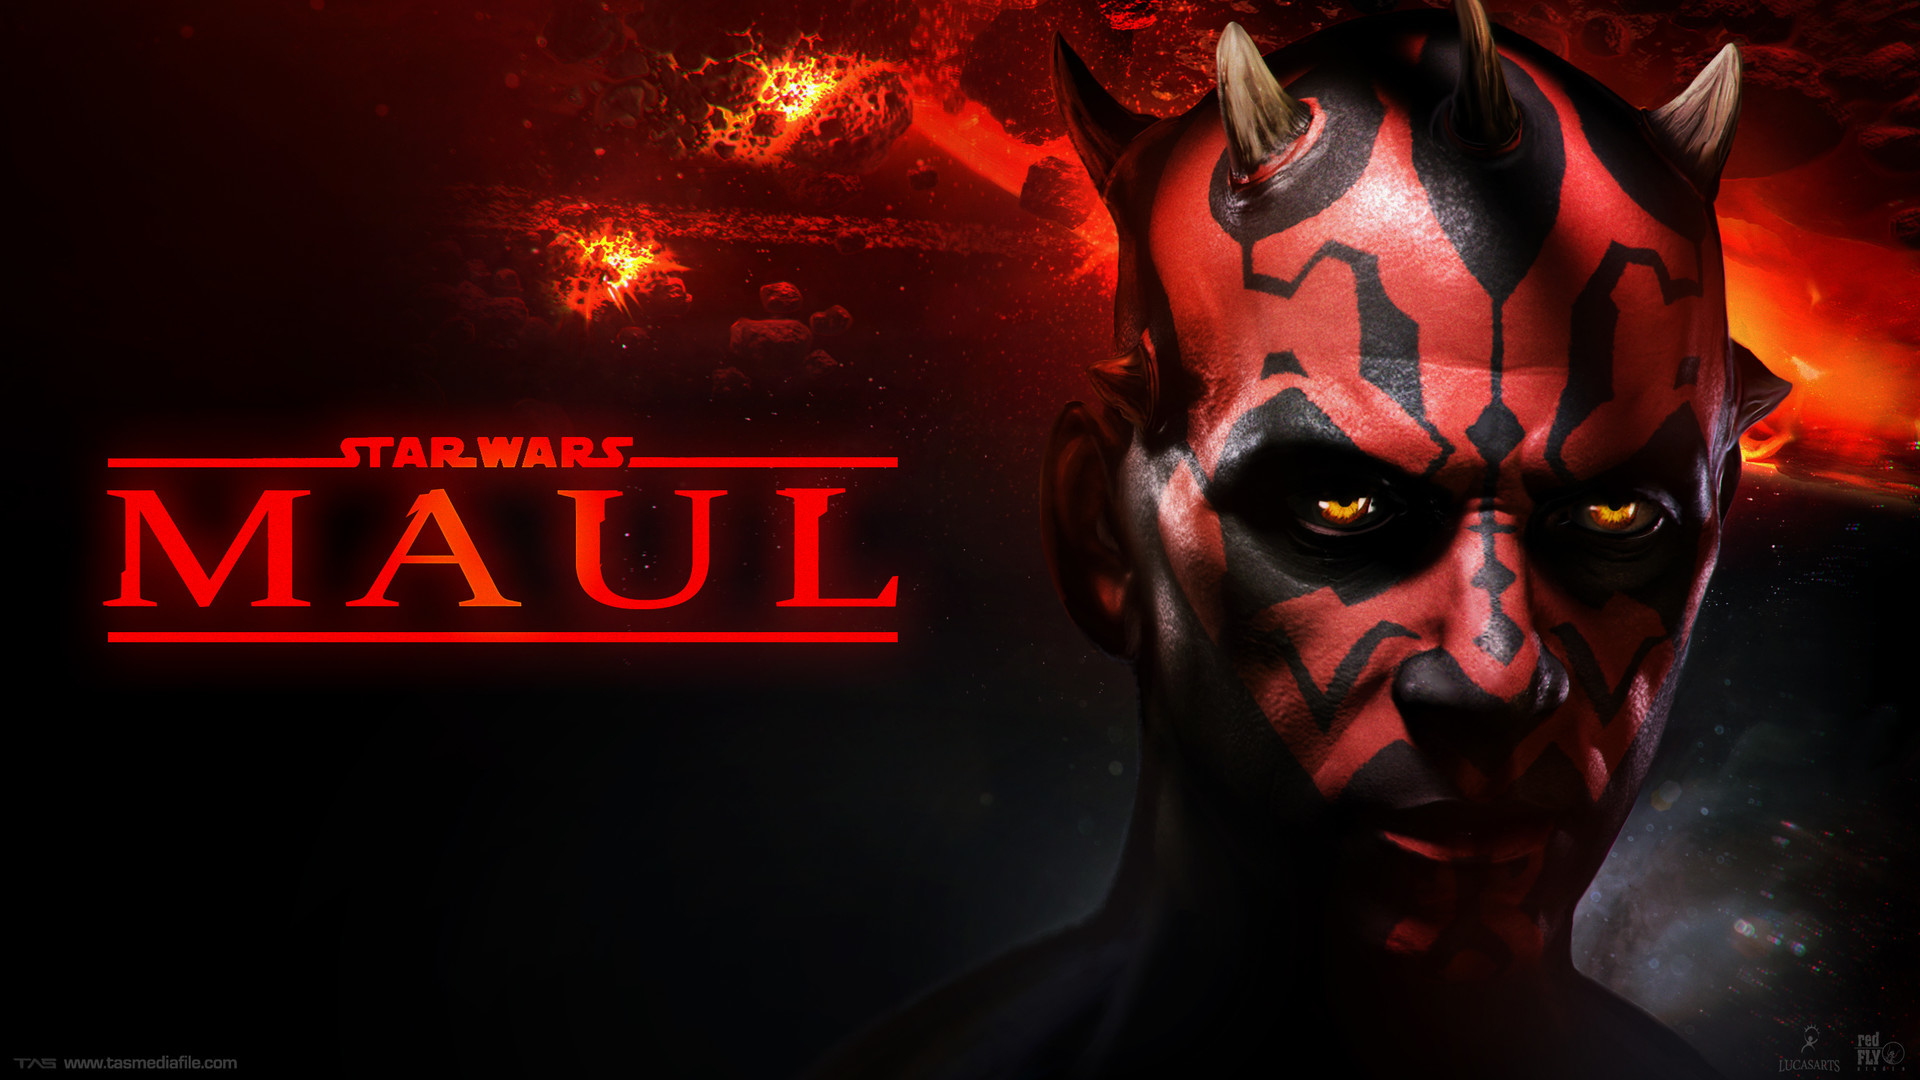 1920x1080 The game, titled Star Wars: Maul, was in development between 2010 and 2011,  but the plug was pulled by LucasArts prior to Lucasfilm's sale to Disney.